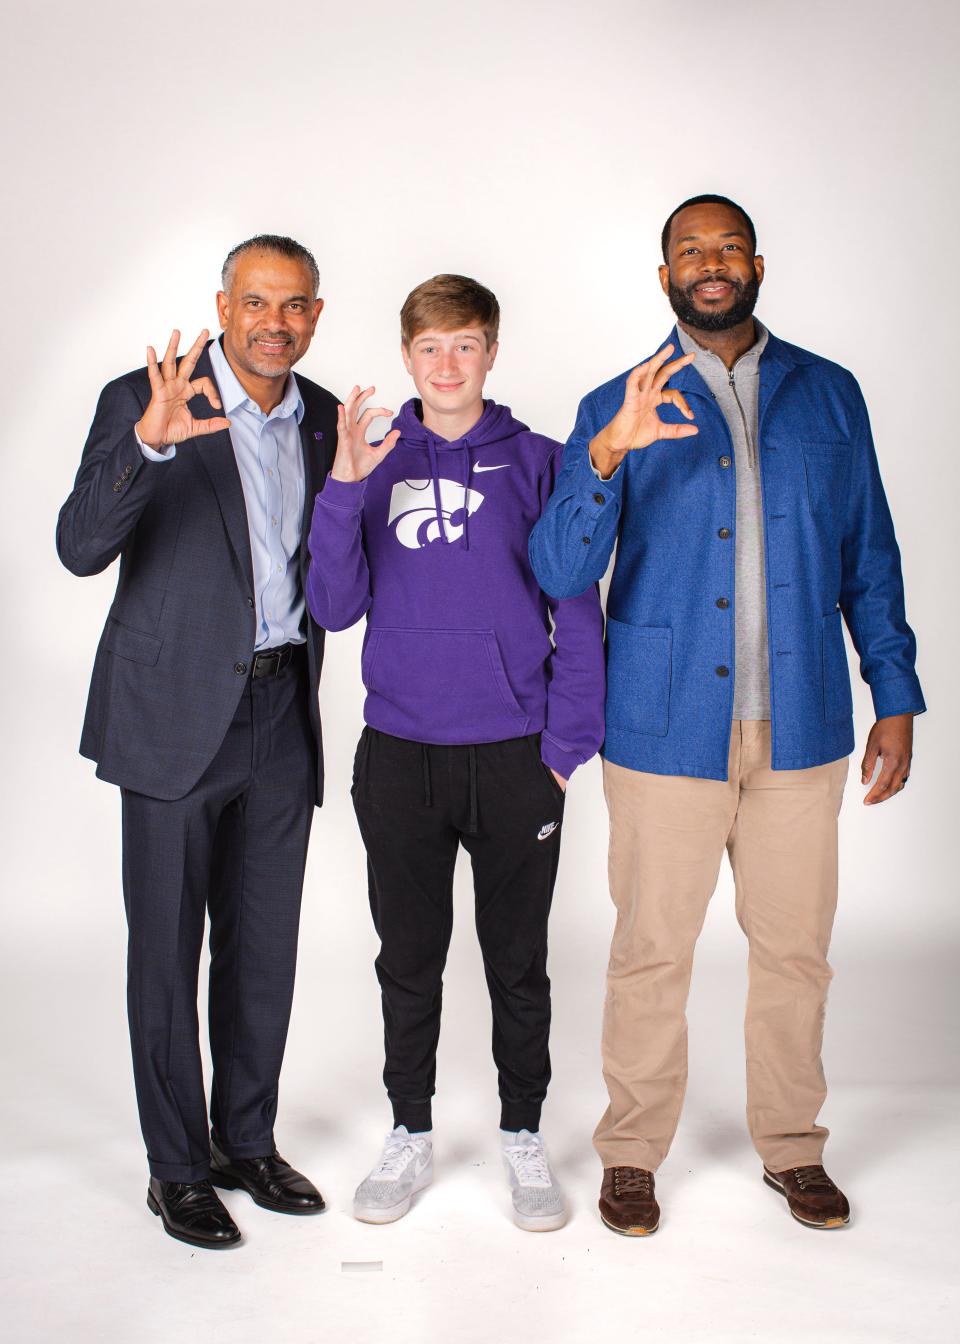 From left to right: Kansas State basketball coach Jerome Tang, Hayden High School student Dylan Foster and Kansas State associate head coach Ulric Maligi.